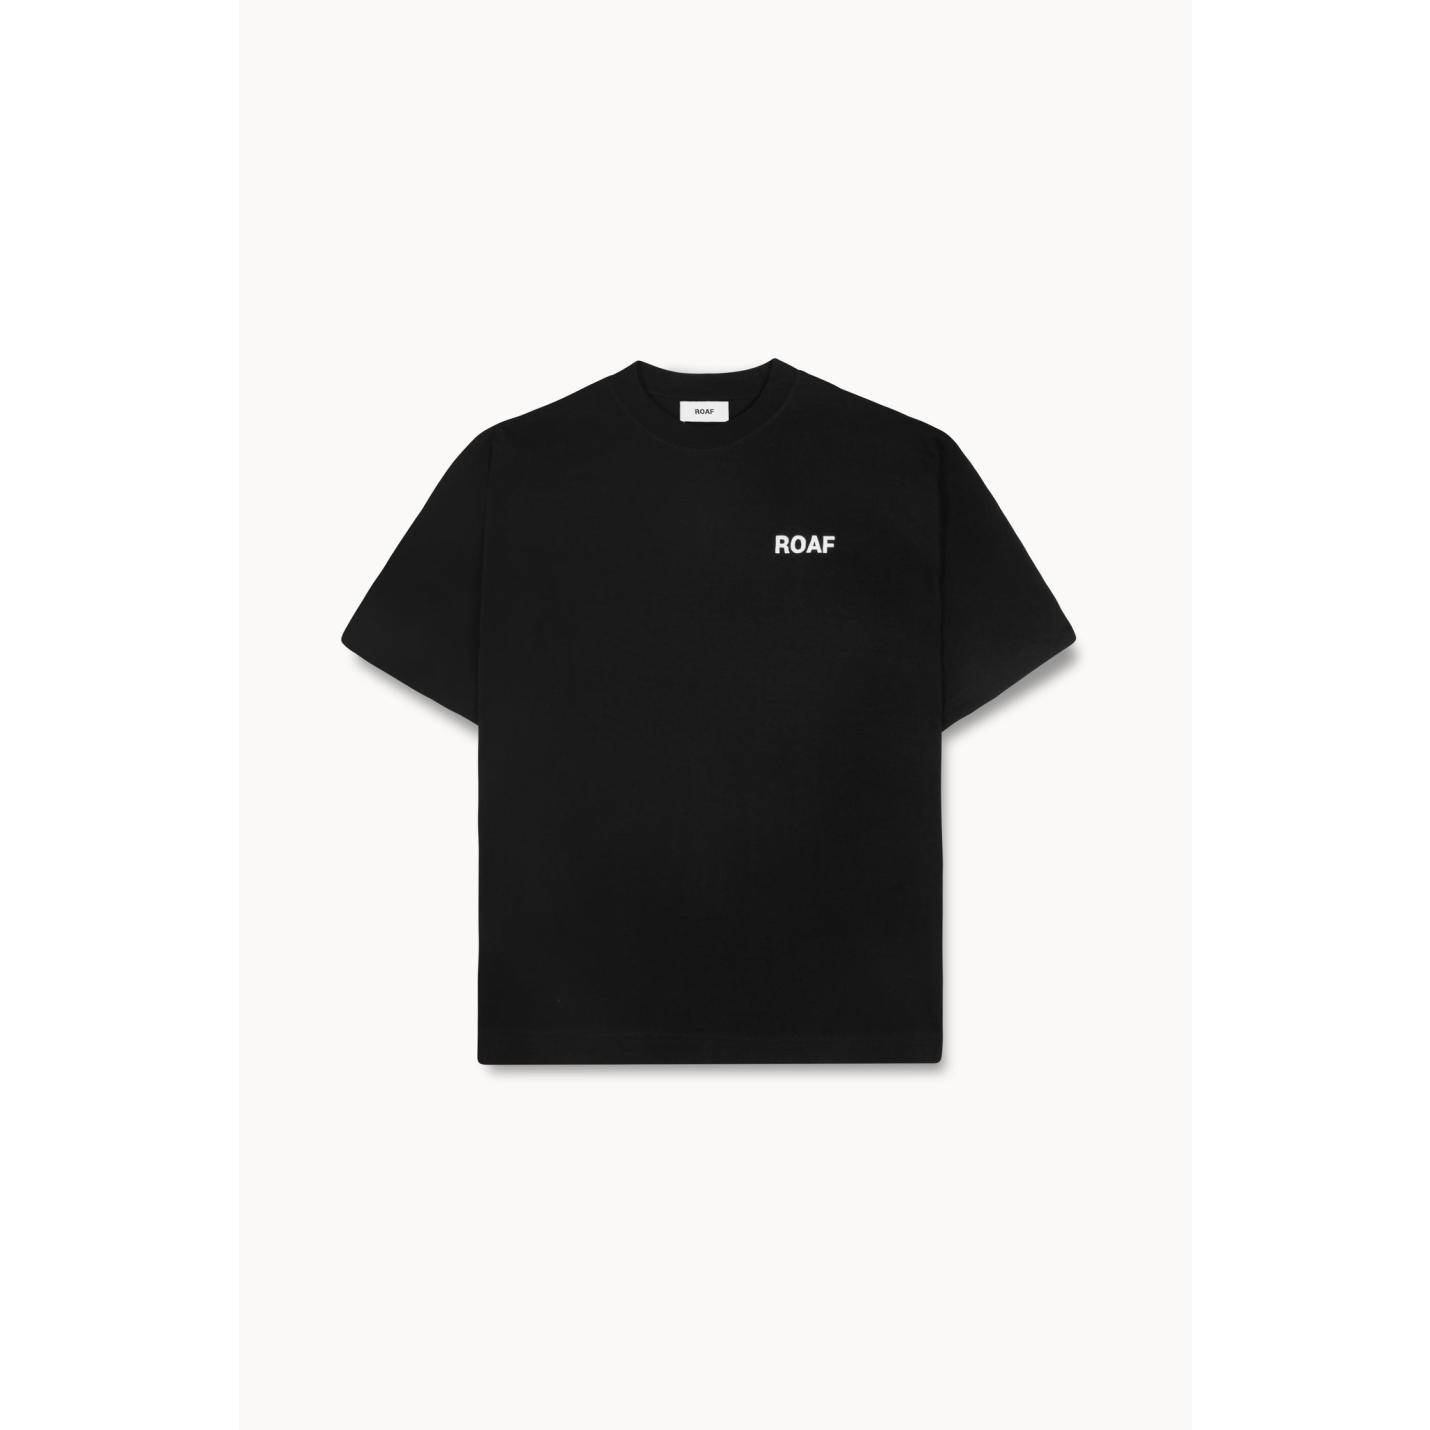 ROAF Logo Tee in Washed Black Cotton - XS